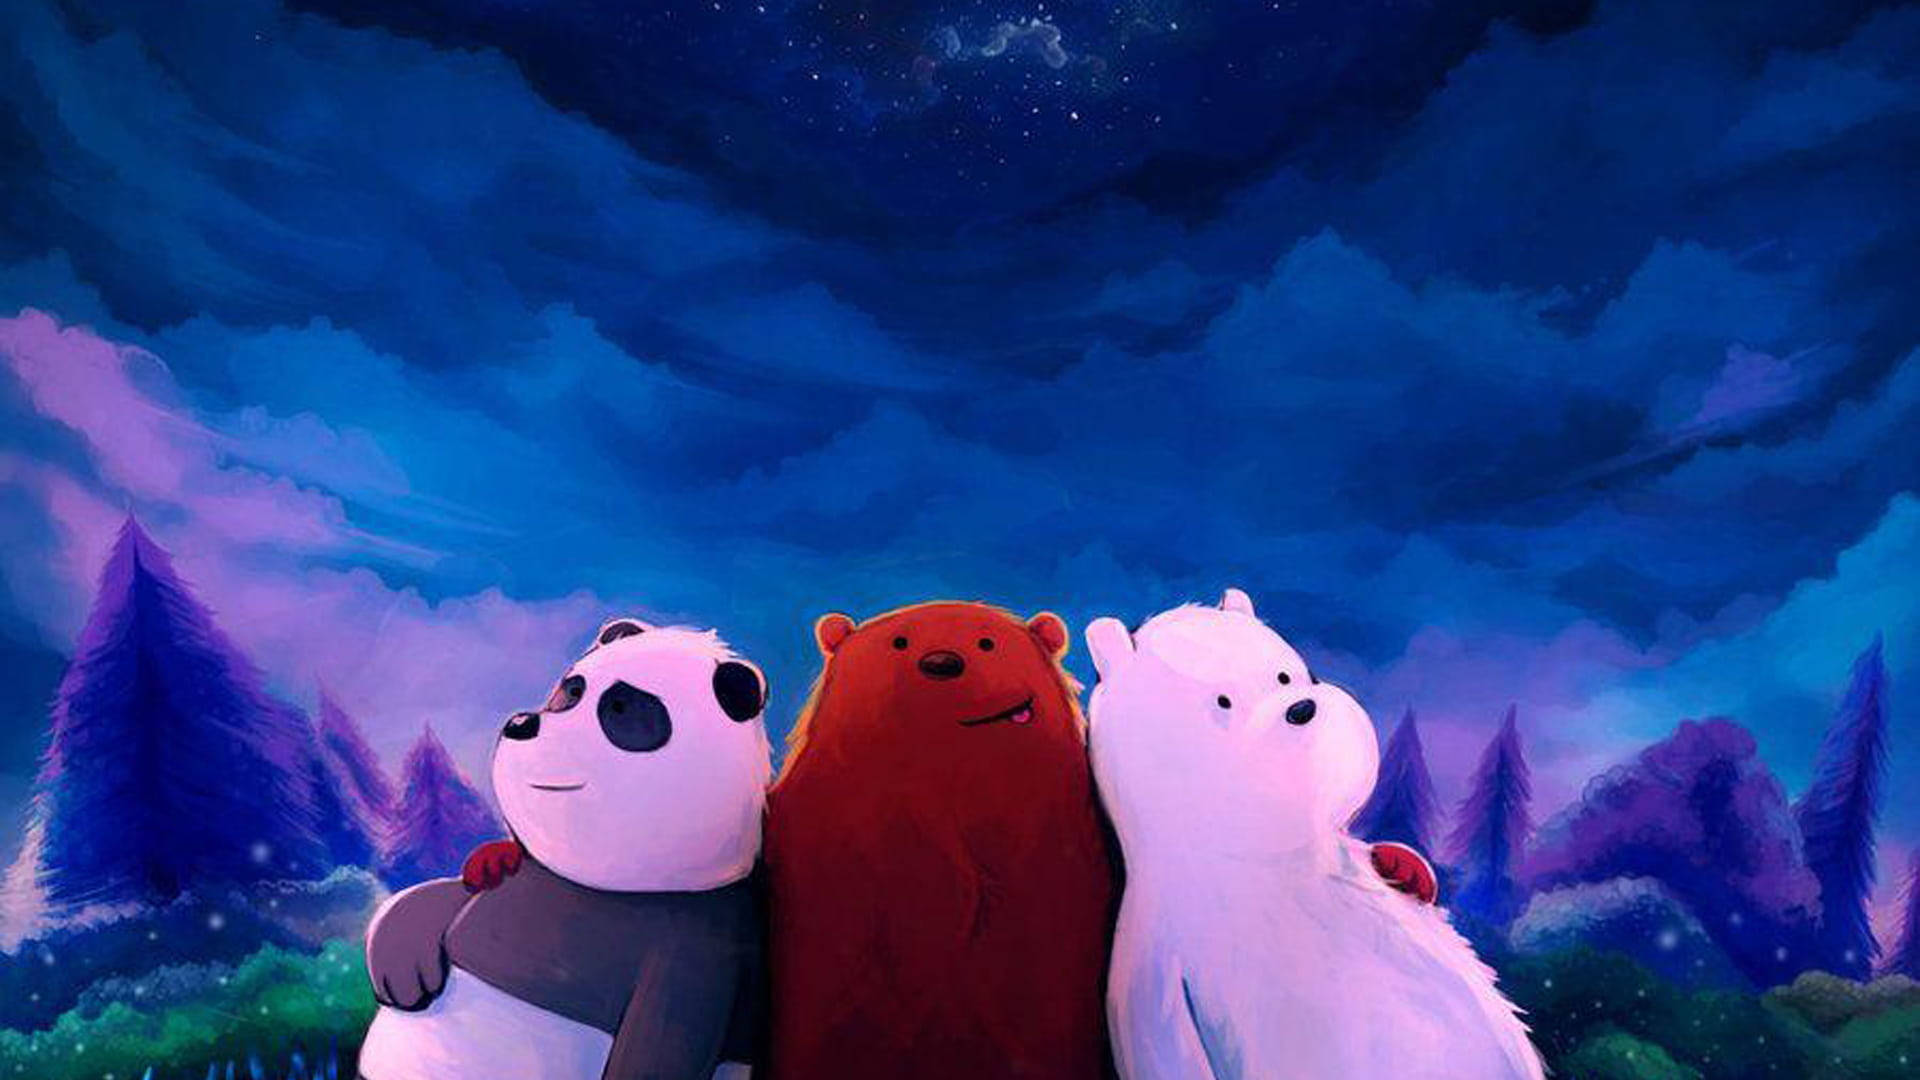 Embracing The Night Skies - A We Bare Bears Aesthetic Background